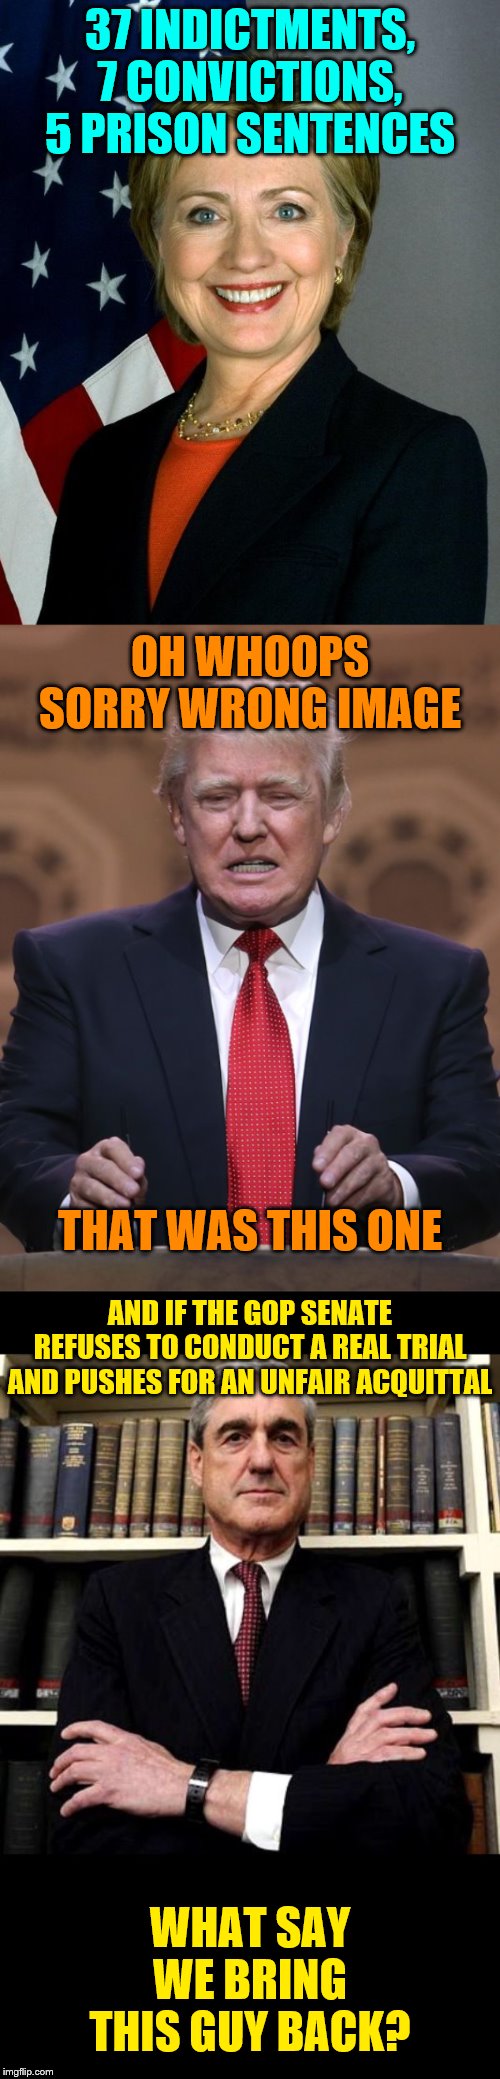 What massive corruption! | 37 INDICTMENTS, 7 CONVICTIONS, 5 PRISON SENTENCES; OH WHOOPS SORRY WRONG IMAGE; THAT WAS THIS ONE; AND IF THE GOP SENATE REFUSES TO CONDUCT A REAL TRIAL AND PUSHES FOR AN UNFAIR ACQUITTAL; WHAT SAY WE BRING THIS GUY BACK? | image tagged in memes,hillary clinton,donald trump,robert mueller,trump impeachment,senate | made w/ Imgflip meme maker